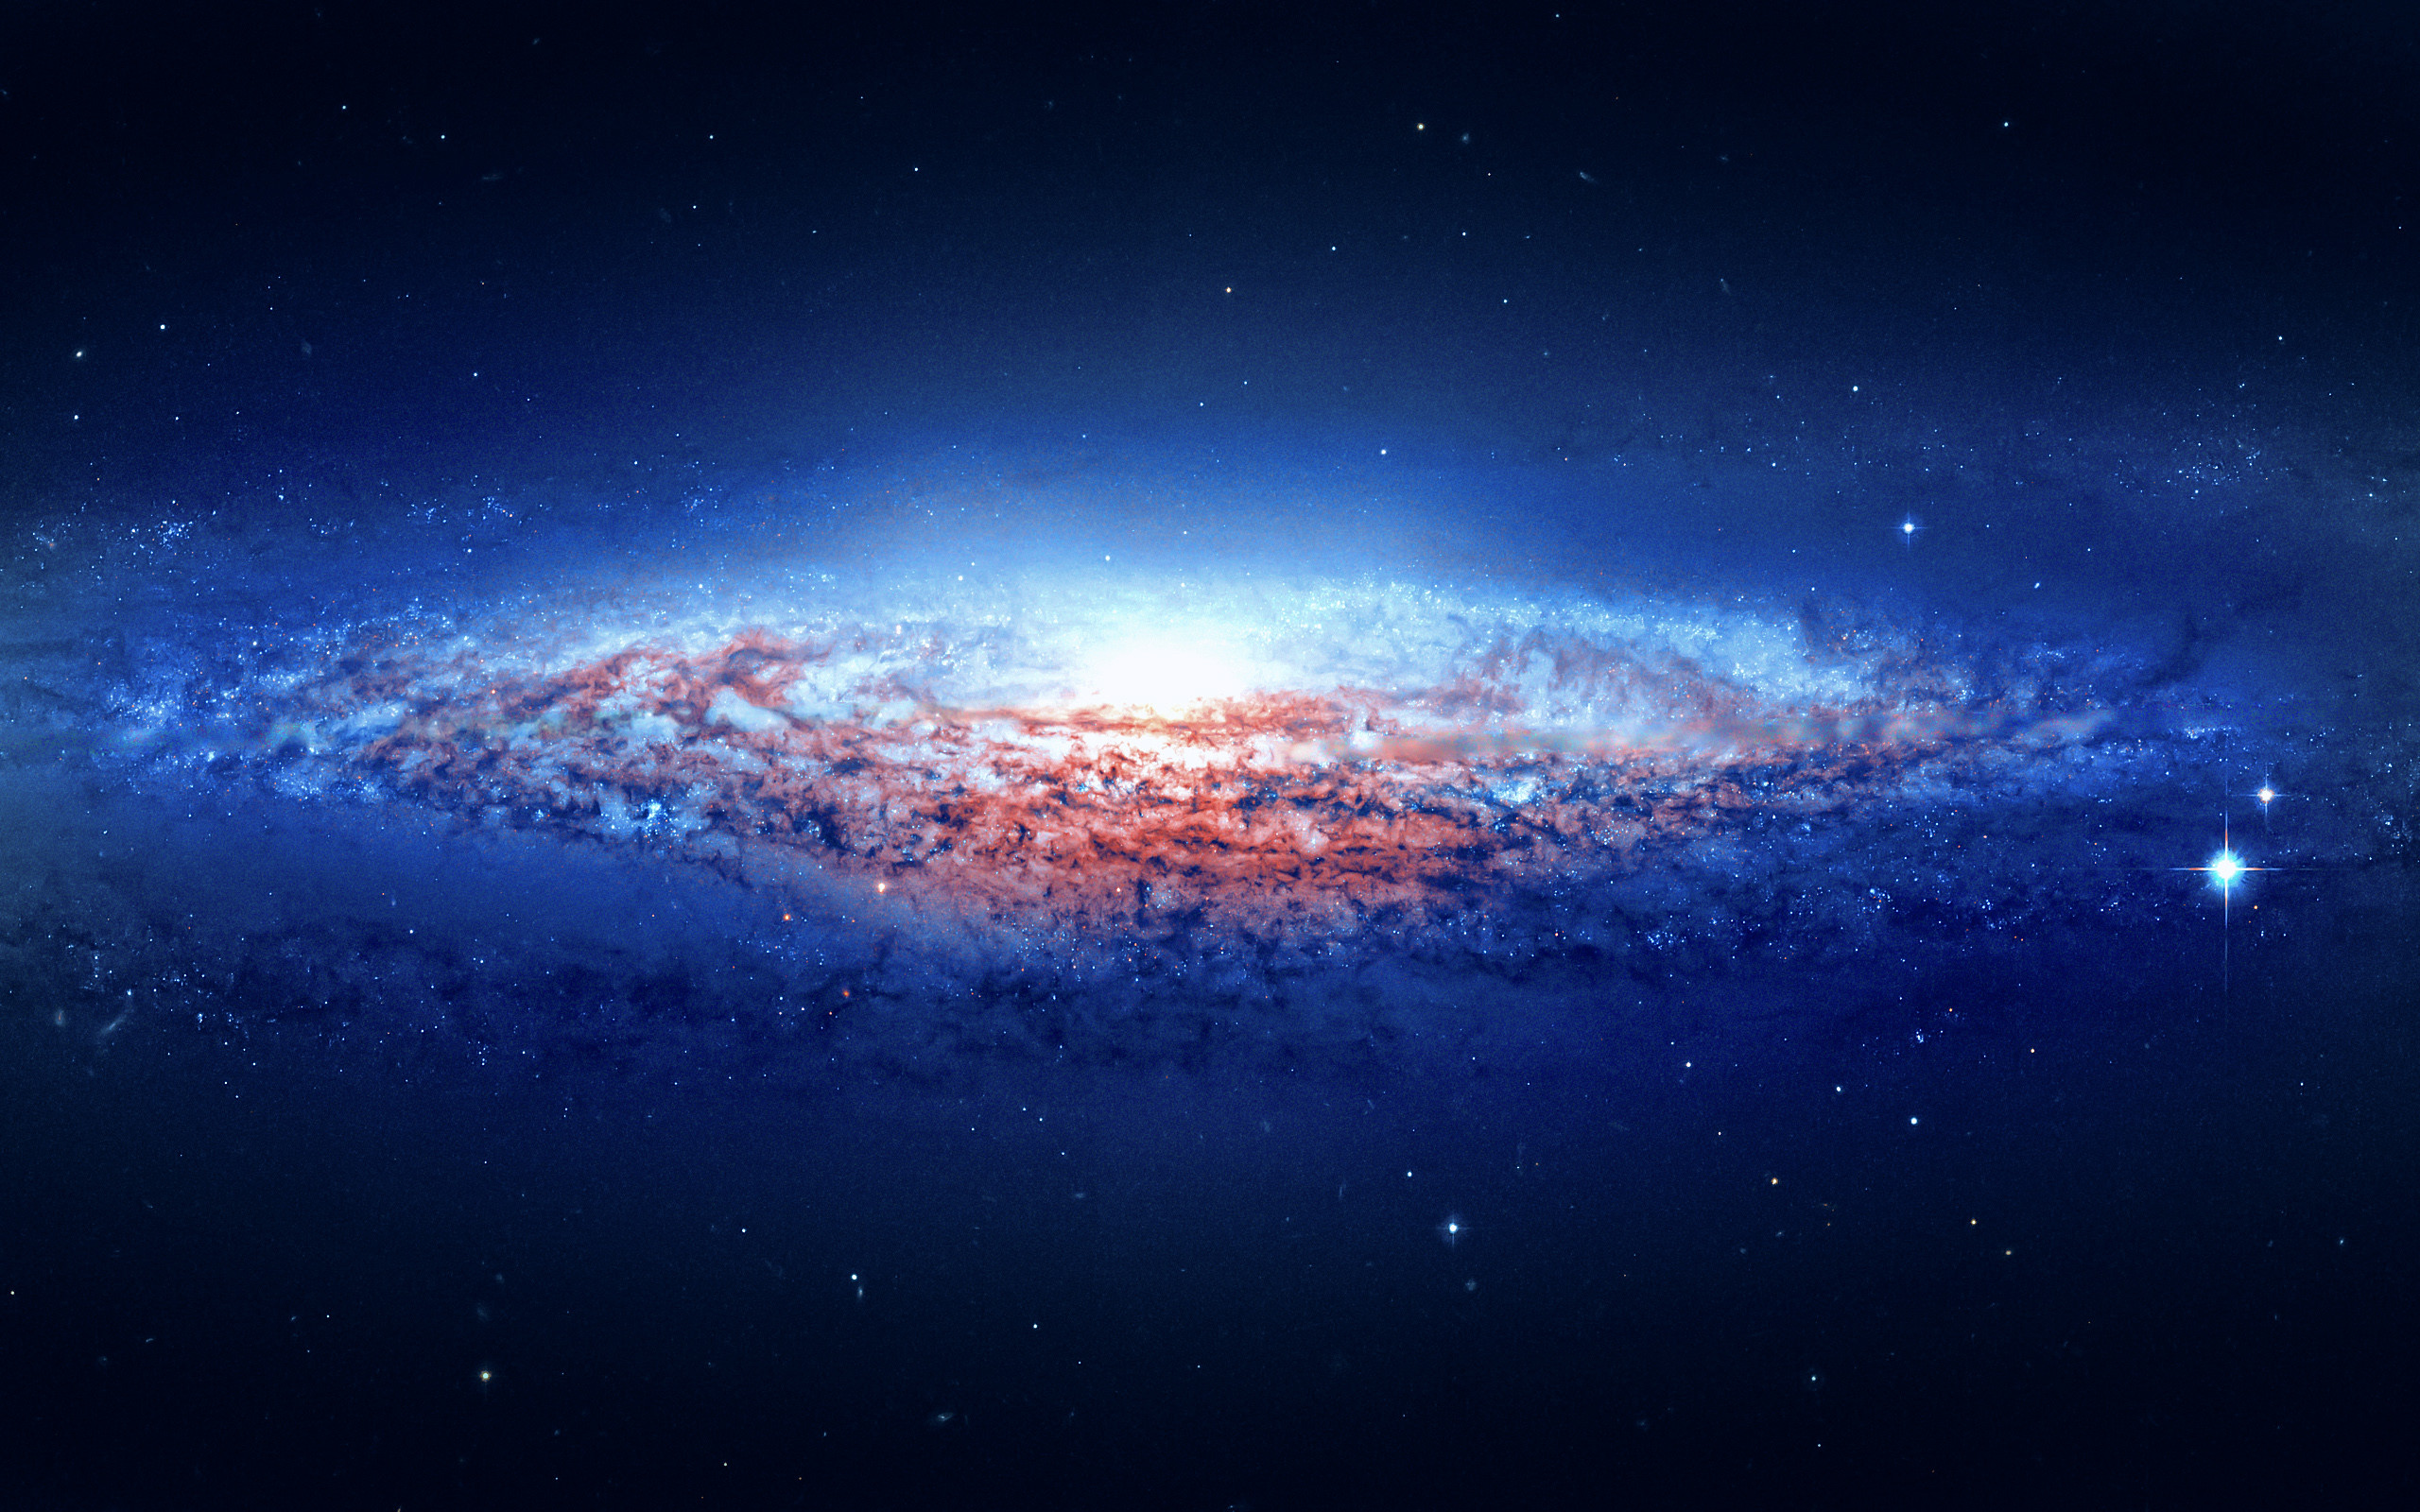 Milky Way Galaxy Wallpaper Mac  Pics about space